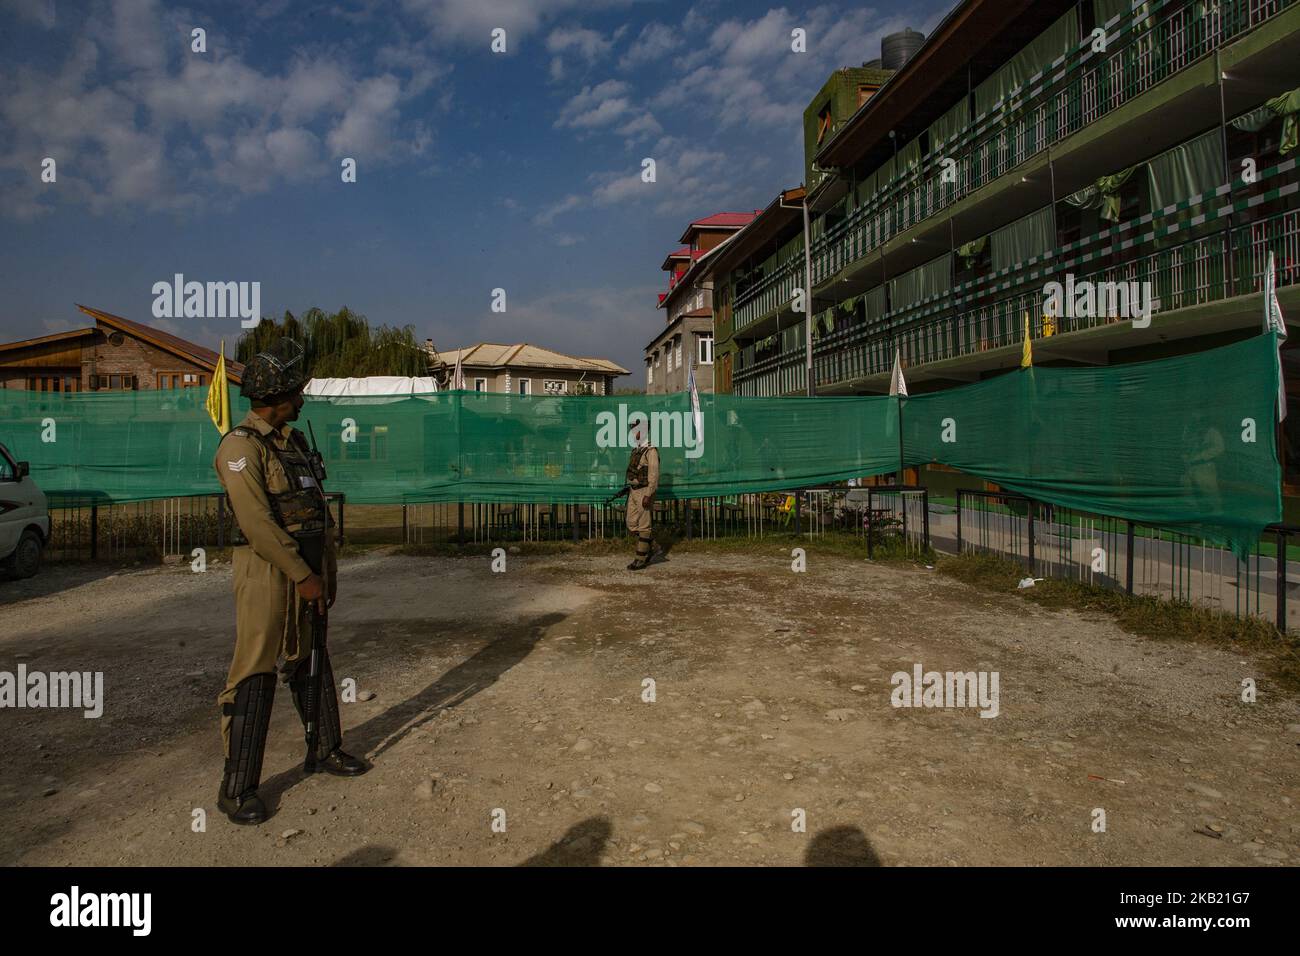 Indian government forces guard a deserted polling station, during the second phase of municipal polls, on October 10, 2018 in Srinagar, the summer capital of Indian administered Kashmir, India. Poor voter turnout marked the second phase of municipal elections in Kashmir amid a partial shutdown and heavy deployment of government forces across the region. Pro-independence groups have rejected the polls as farce and called for a boycott while major pro-India parties like National Conference and Peoples Democratic Party (PDP) also stayed away from the electoral process alleging Indian governments  Stock Photo